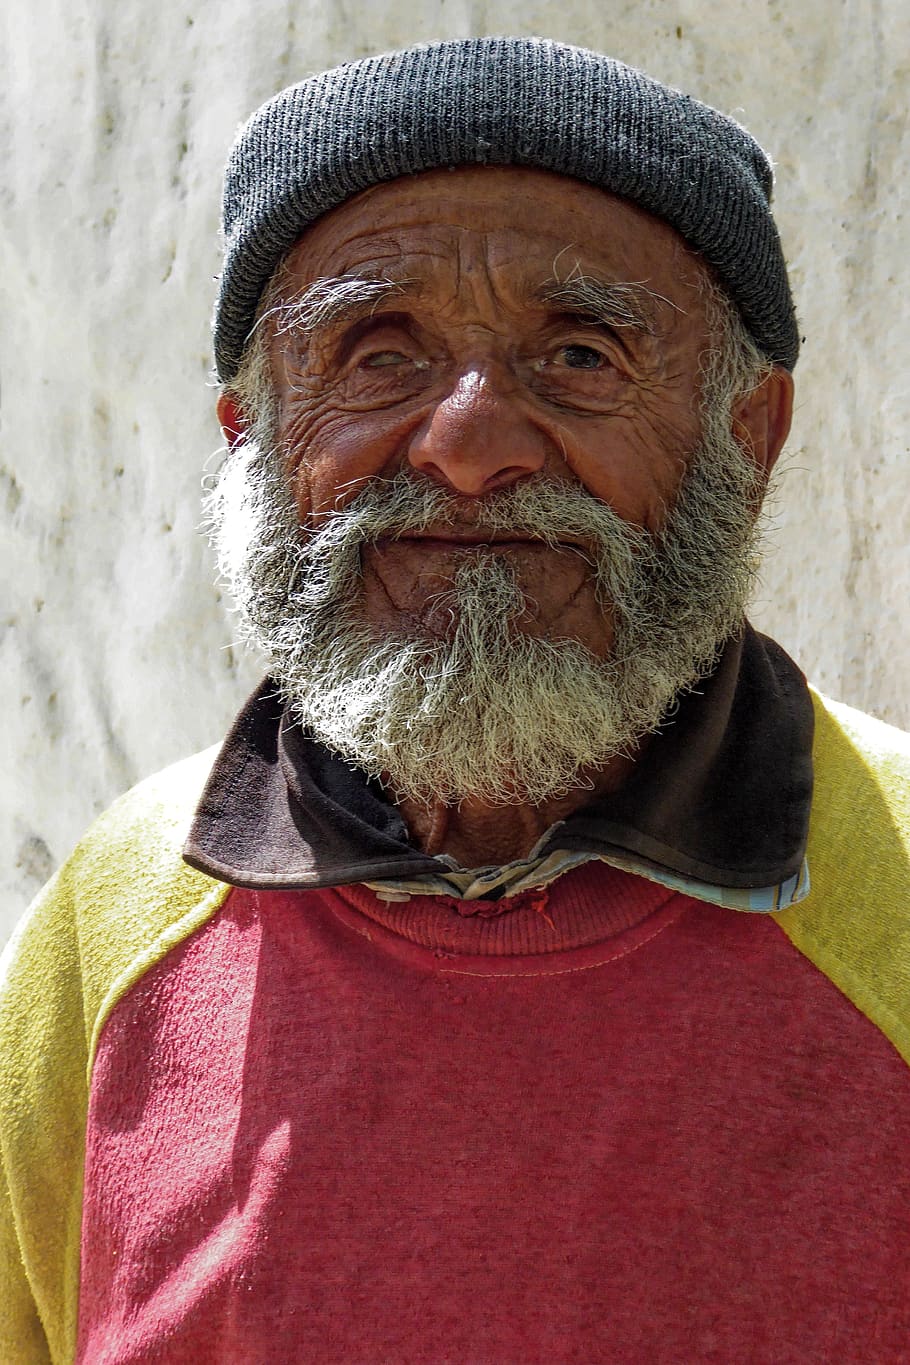 man, old, portrait, age, face, bart, smile, happy, person, facial hair